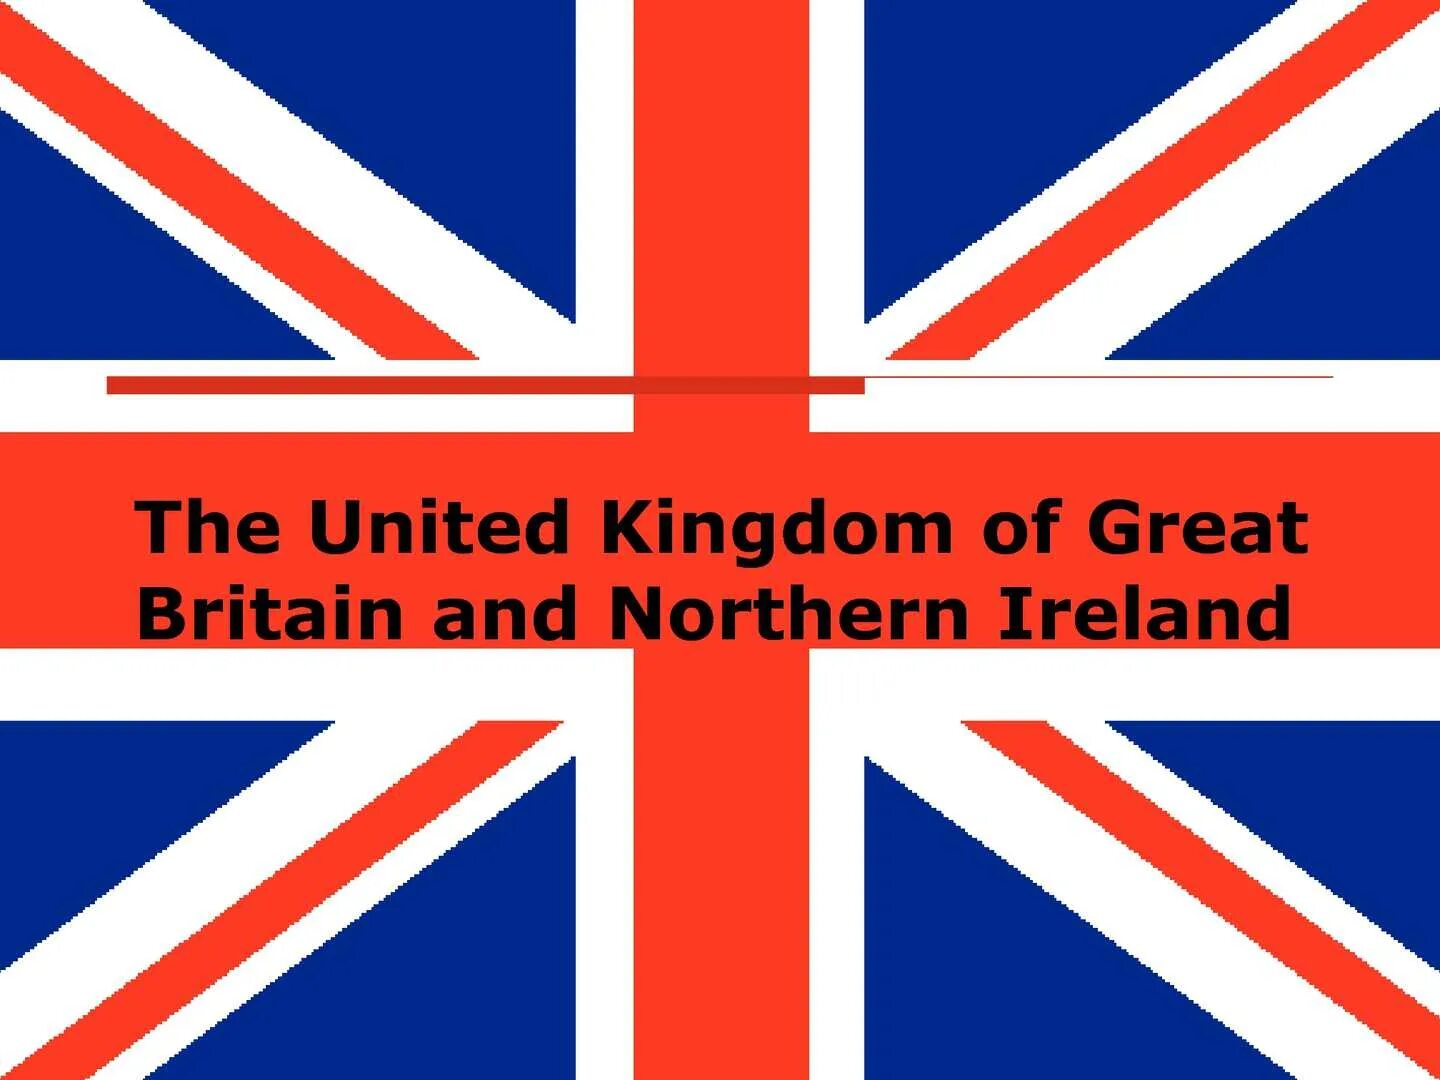 Great britain official name the united. The United Kingdom of great. The uk of great Britain and Northern Ireland. The United Kingdom of great Britain and Northern Ireland (the uk). Kingdom of great Britain.